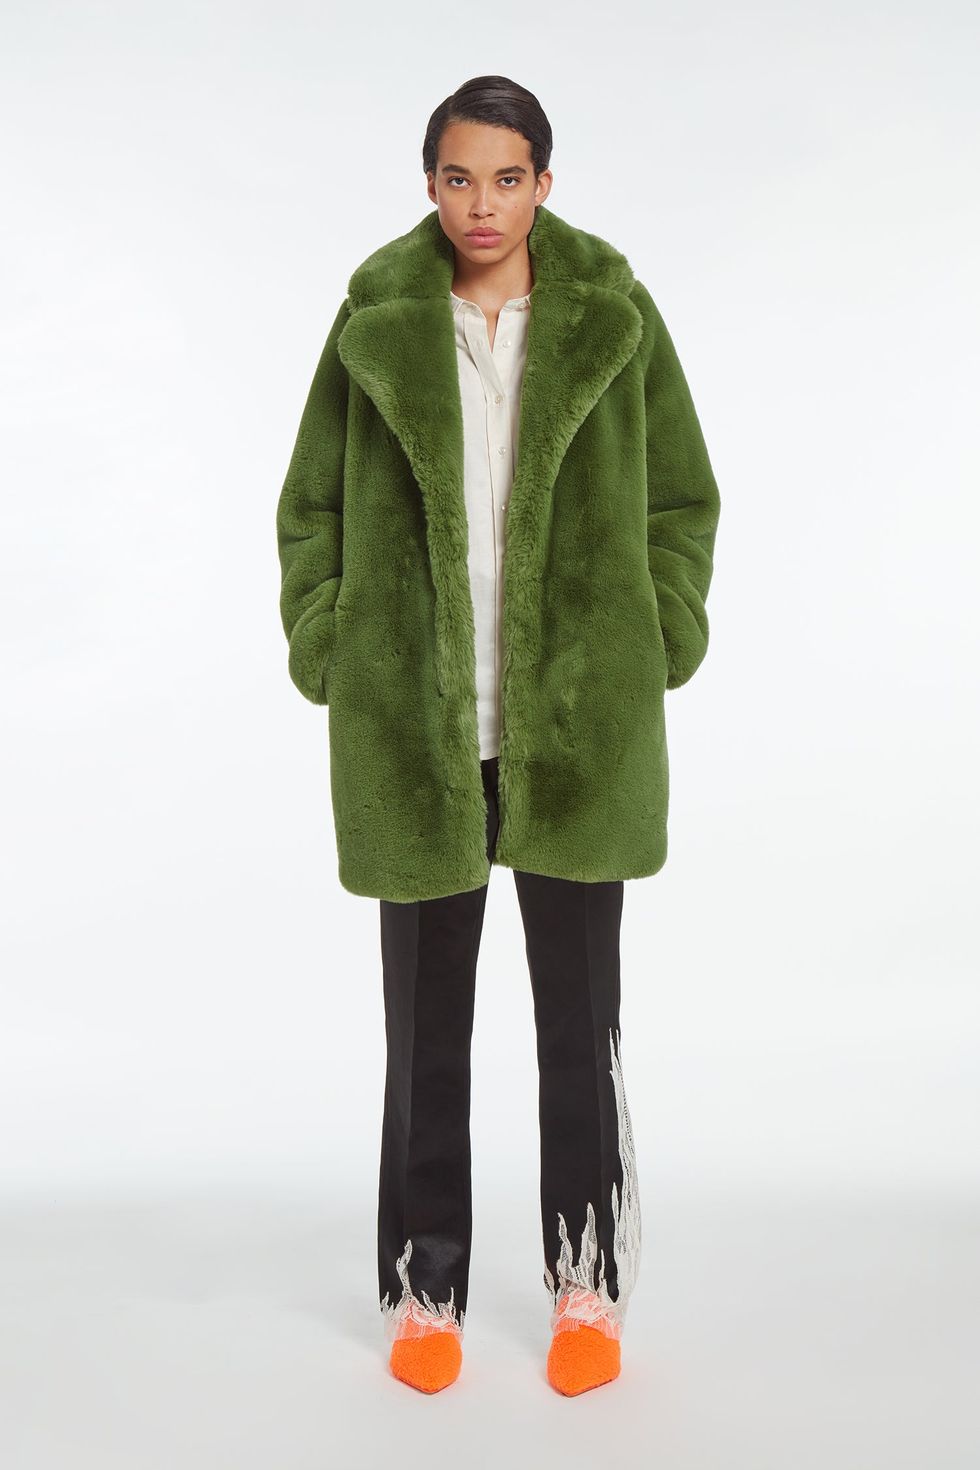 Winter 2022 2023 Fashion Trends - Cold-Weather Style, Right Off the Runways